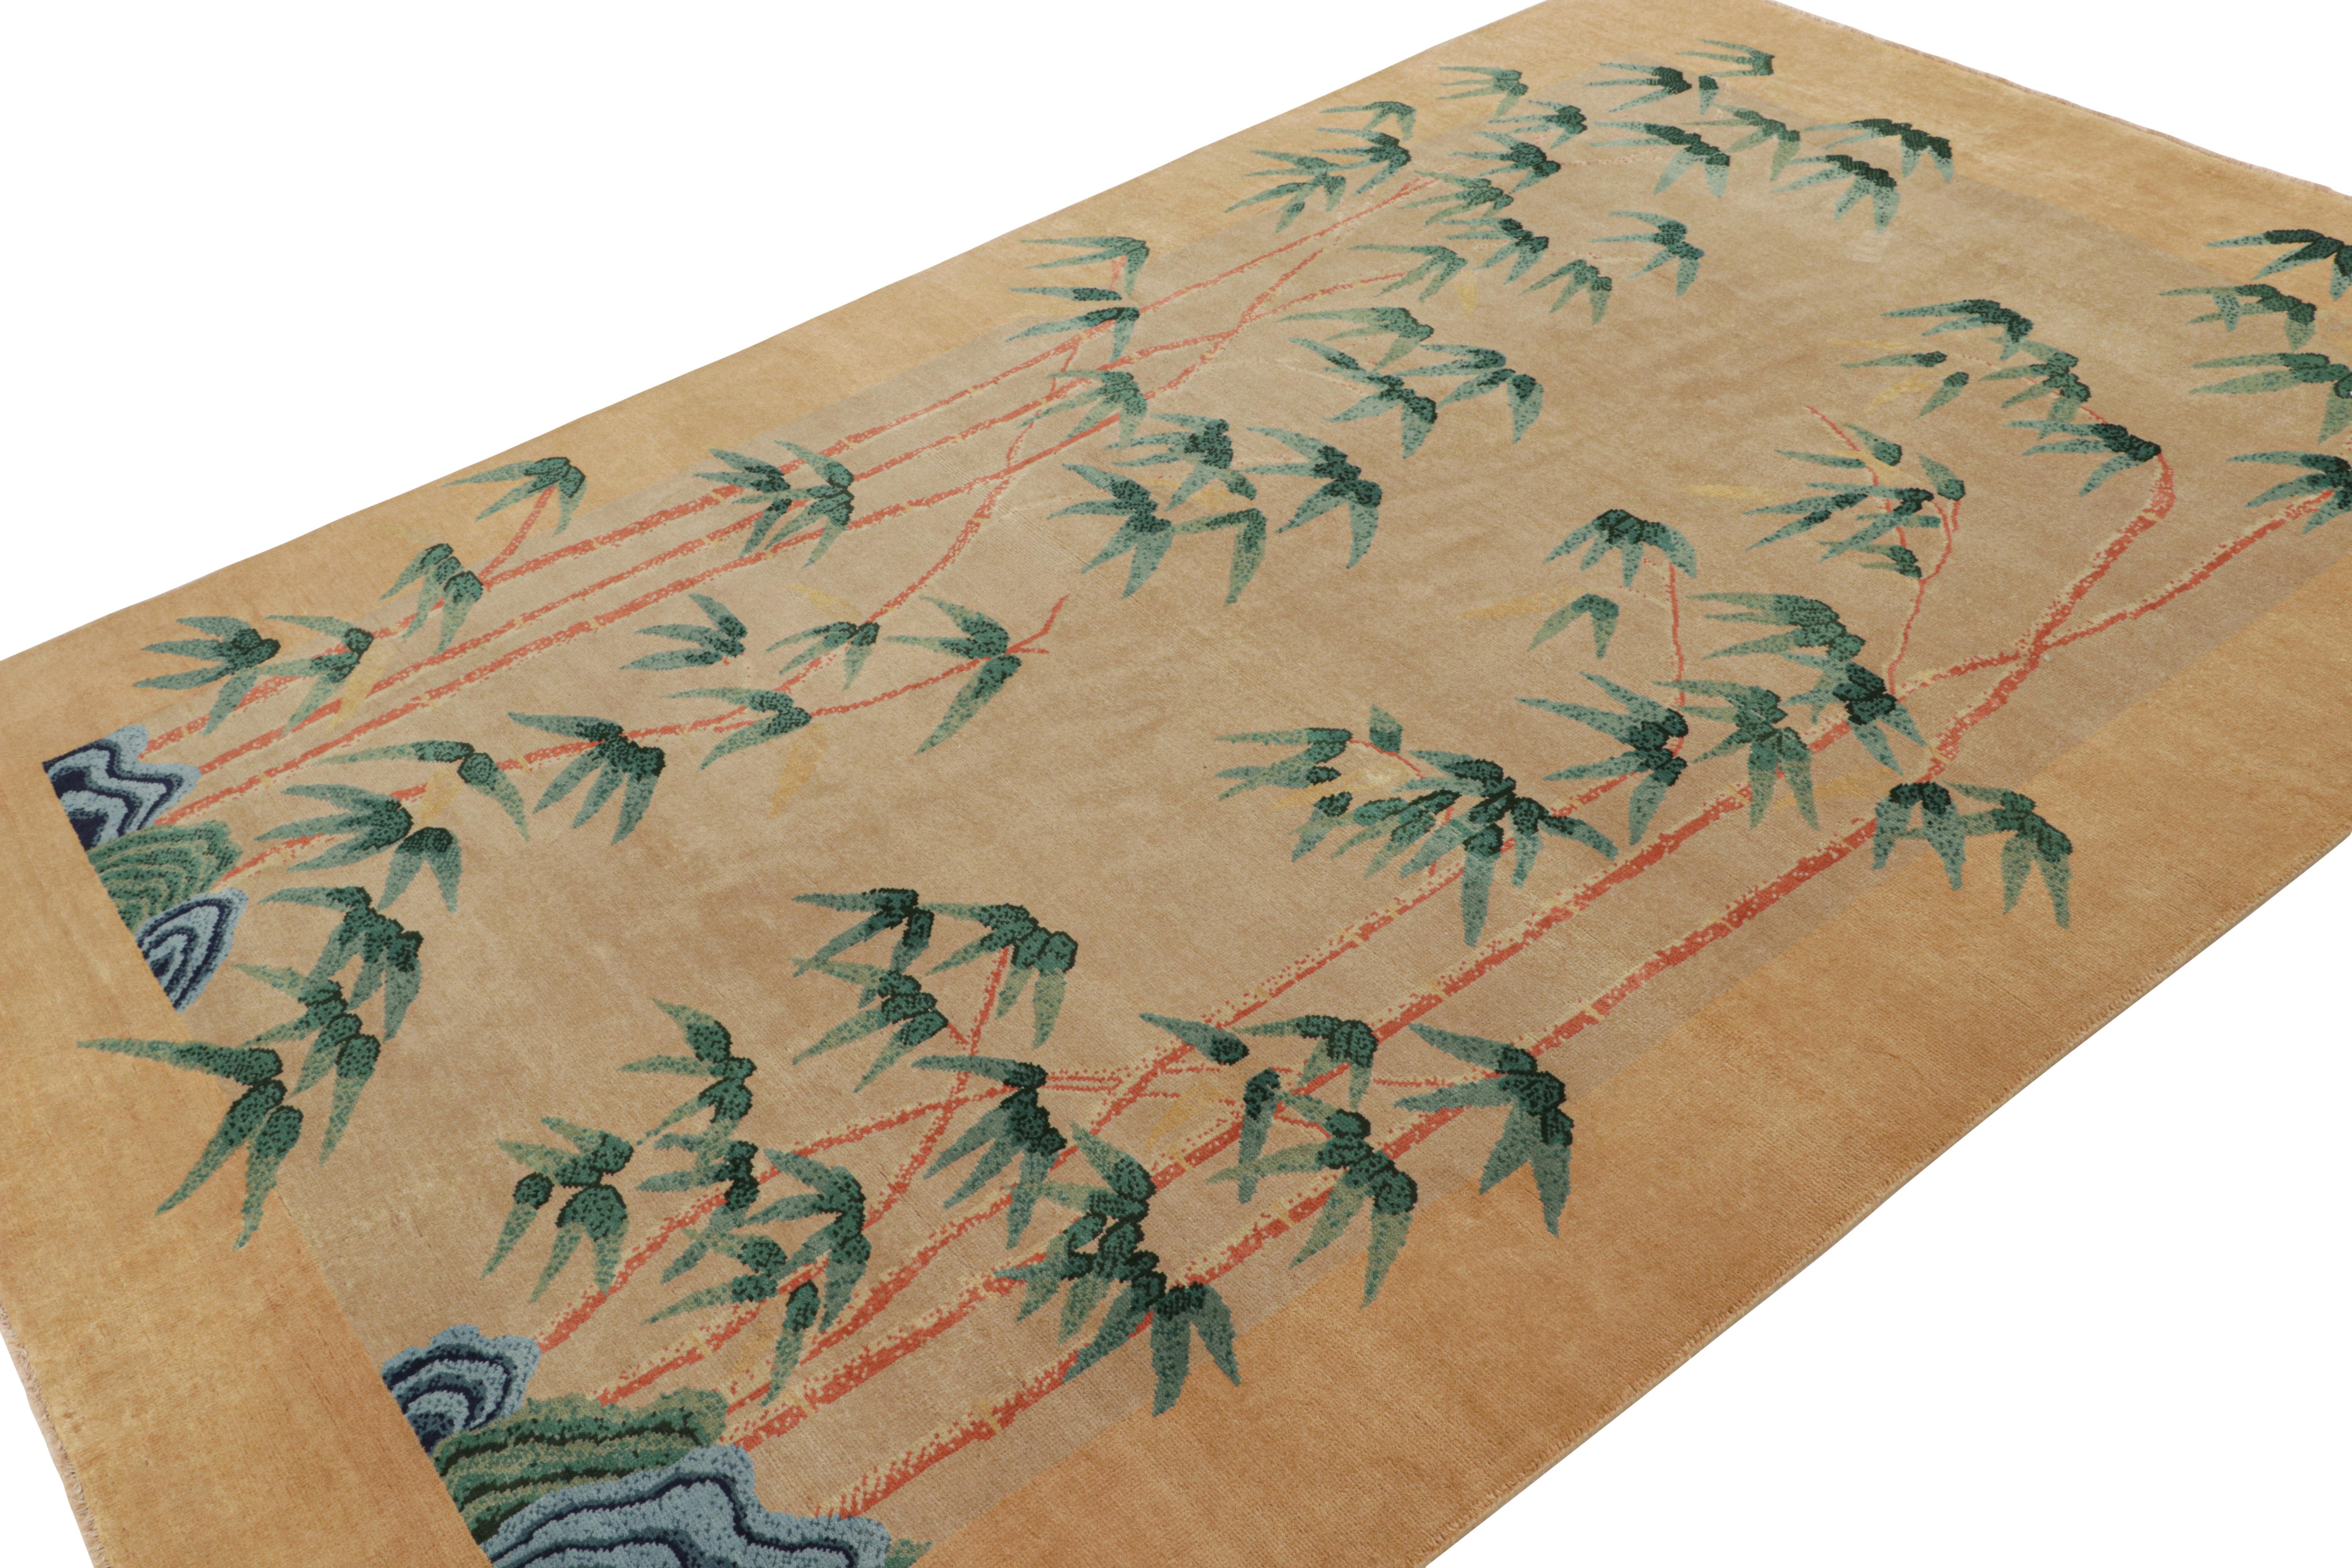 Hand knotted in wool, a 6x9 Chinese art deco style rug inspired by rare period pieces of the 1920s Nichols style. 

On the Design: 

This rug recaptures the Chinese Art Deco rug style of the 1920s. Its floral pattern enjoys a brilliant green, red